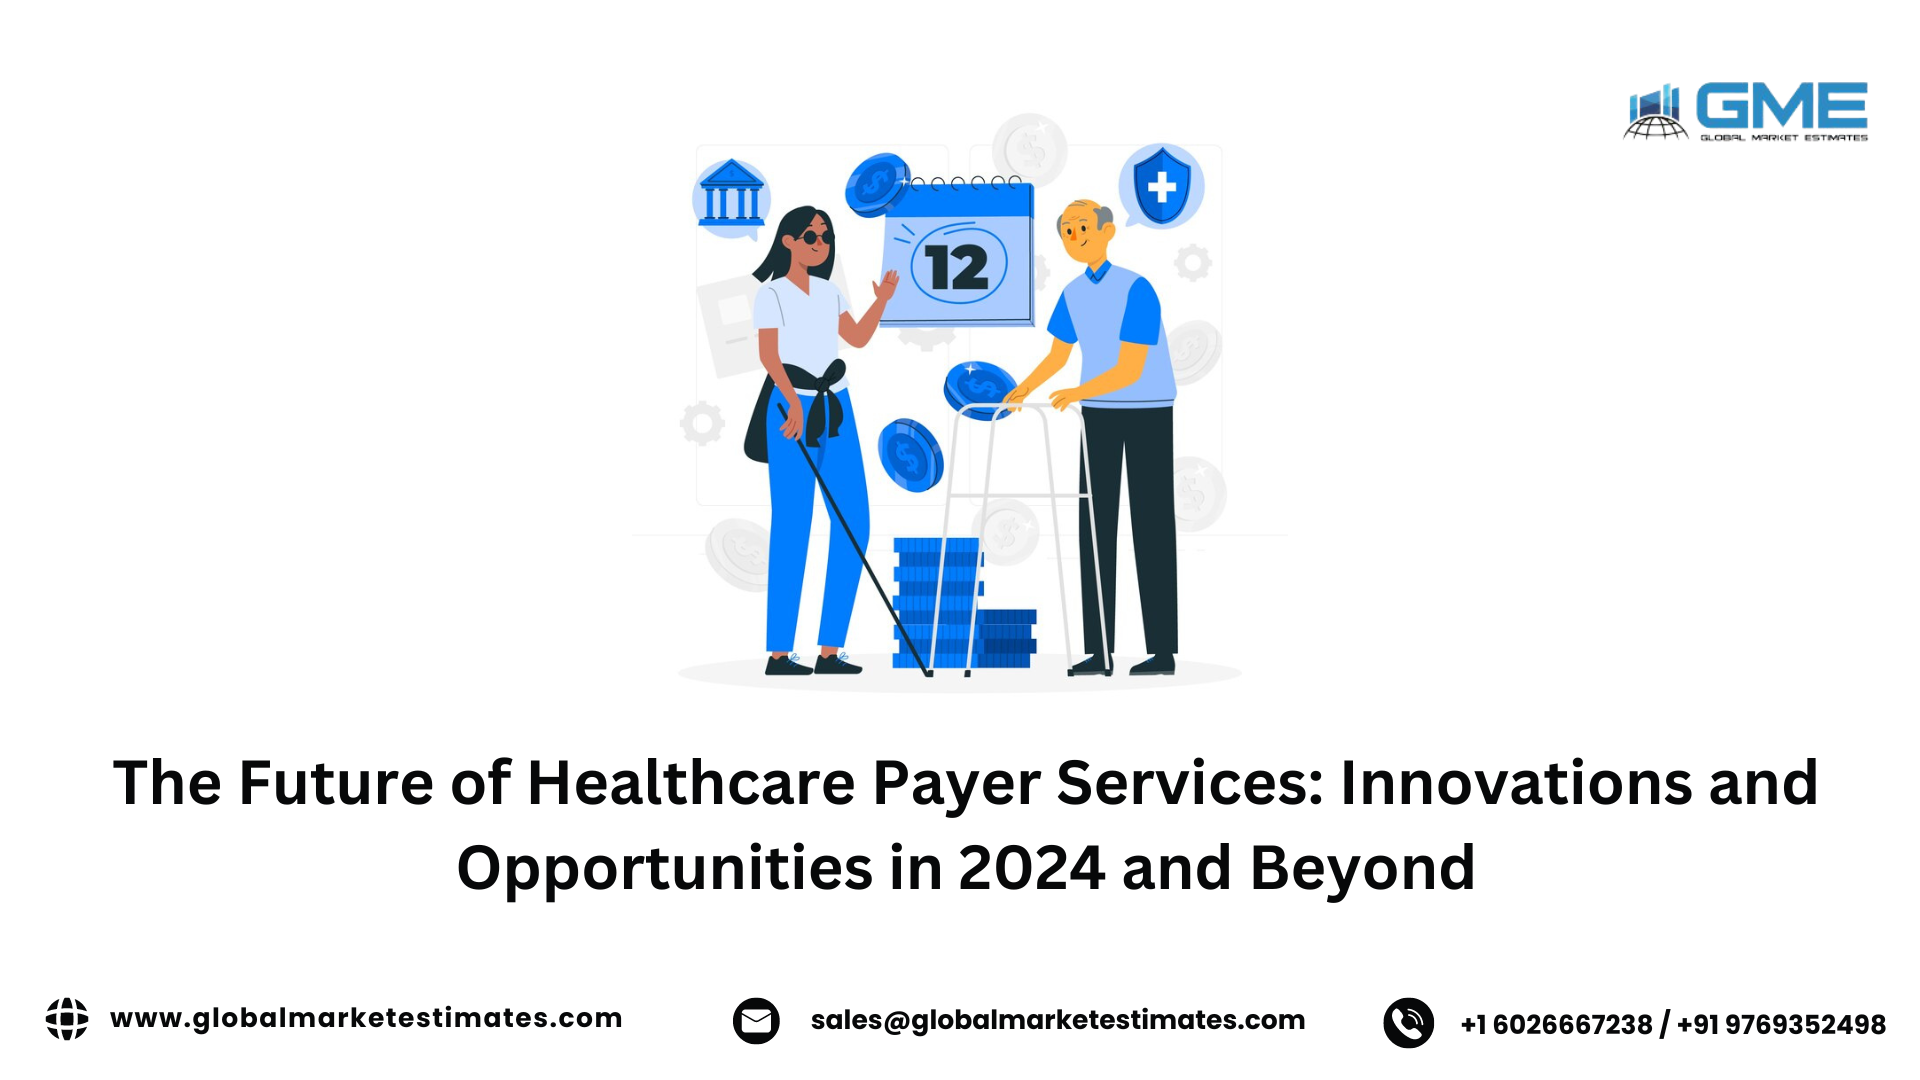 the future of healthcare payer services: innovations and opportunities in 2024 and beyond